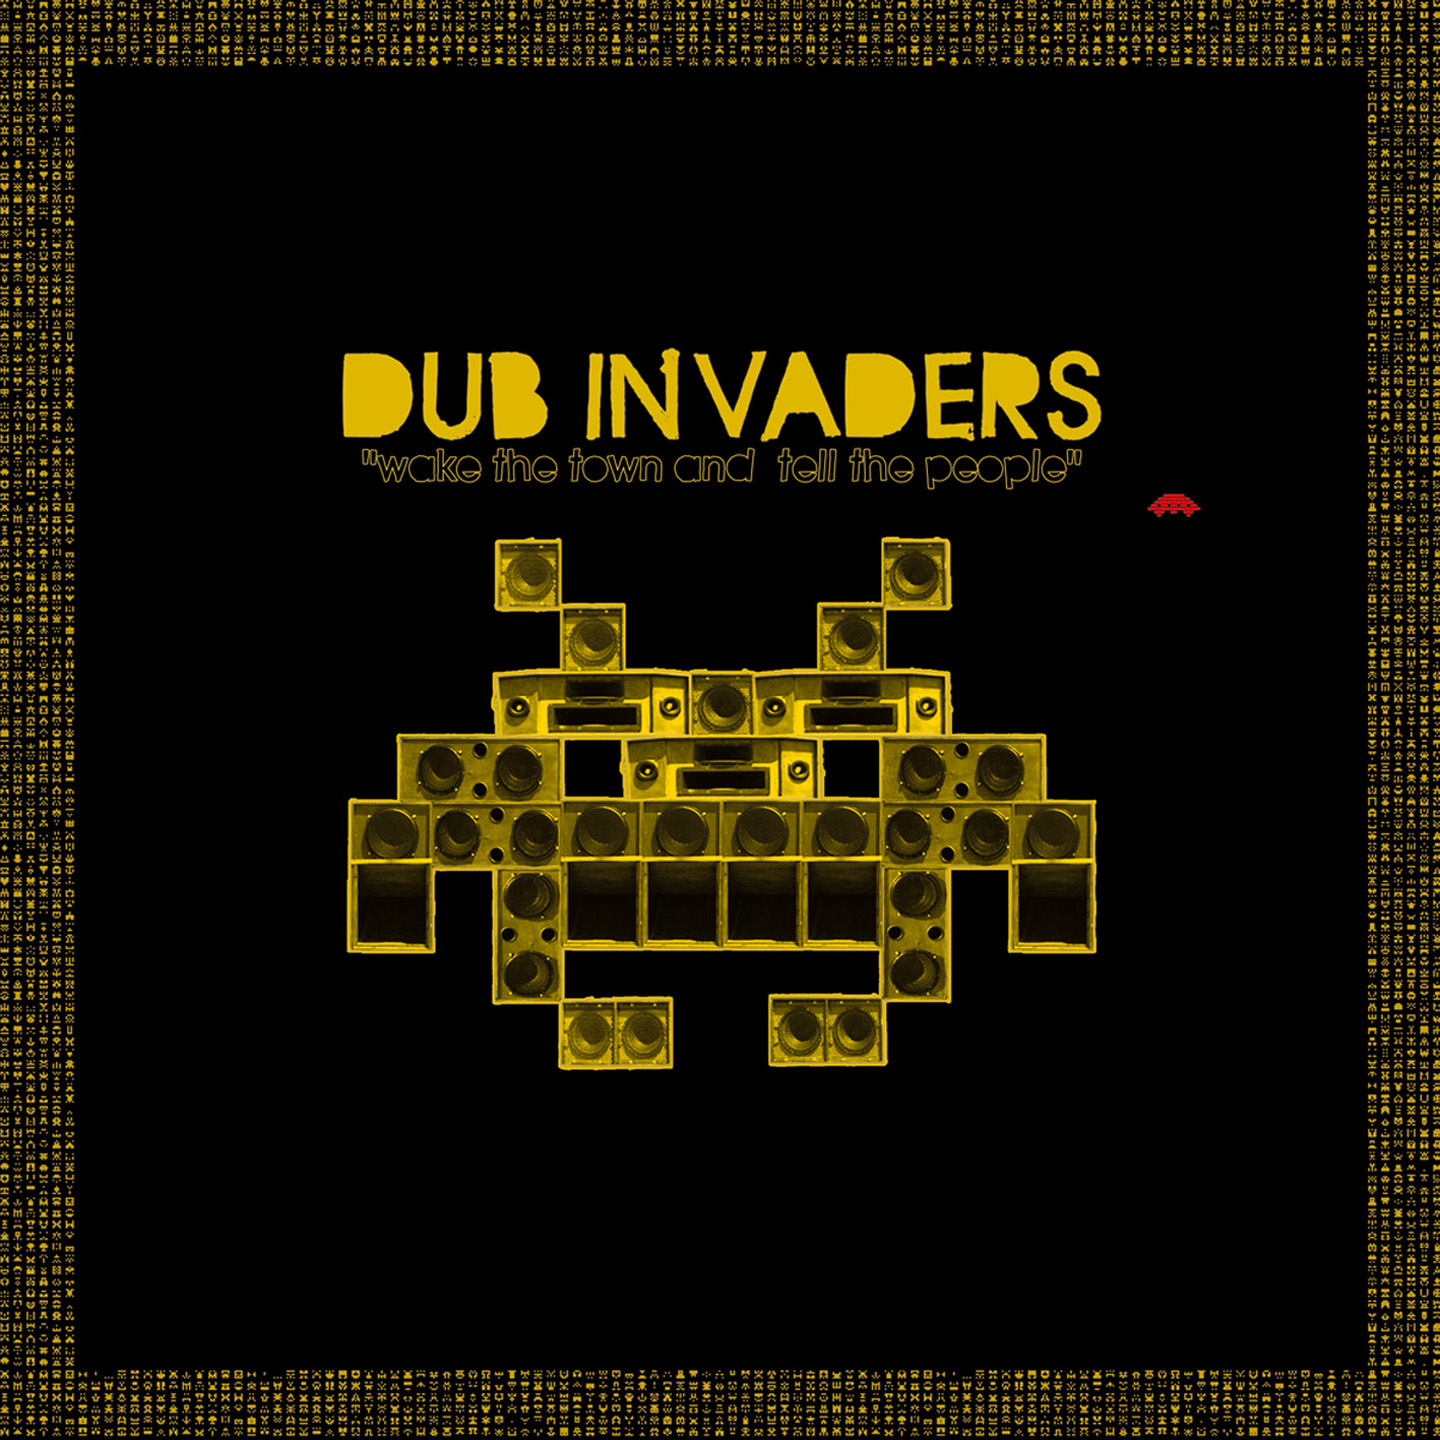 High Tone Presents Dub Invaders (Wake the Town and Tell the People), Dub Invaders, High Tone, Jarring Effects